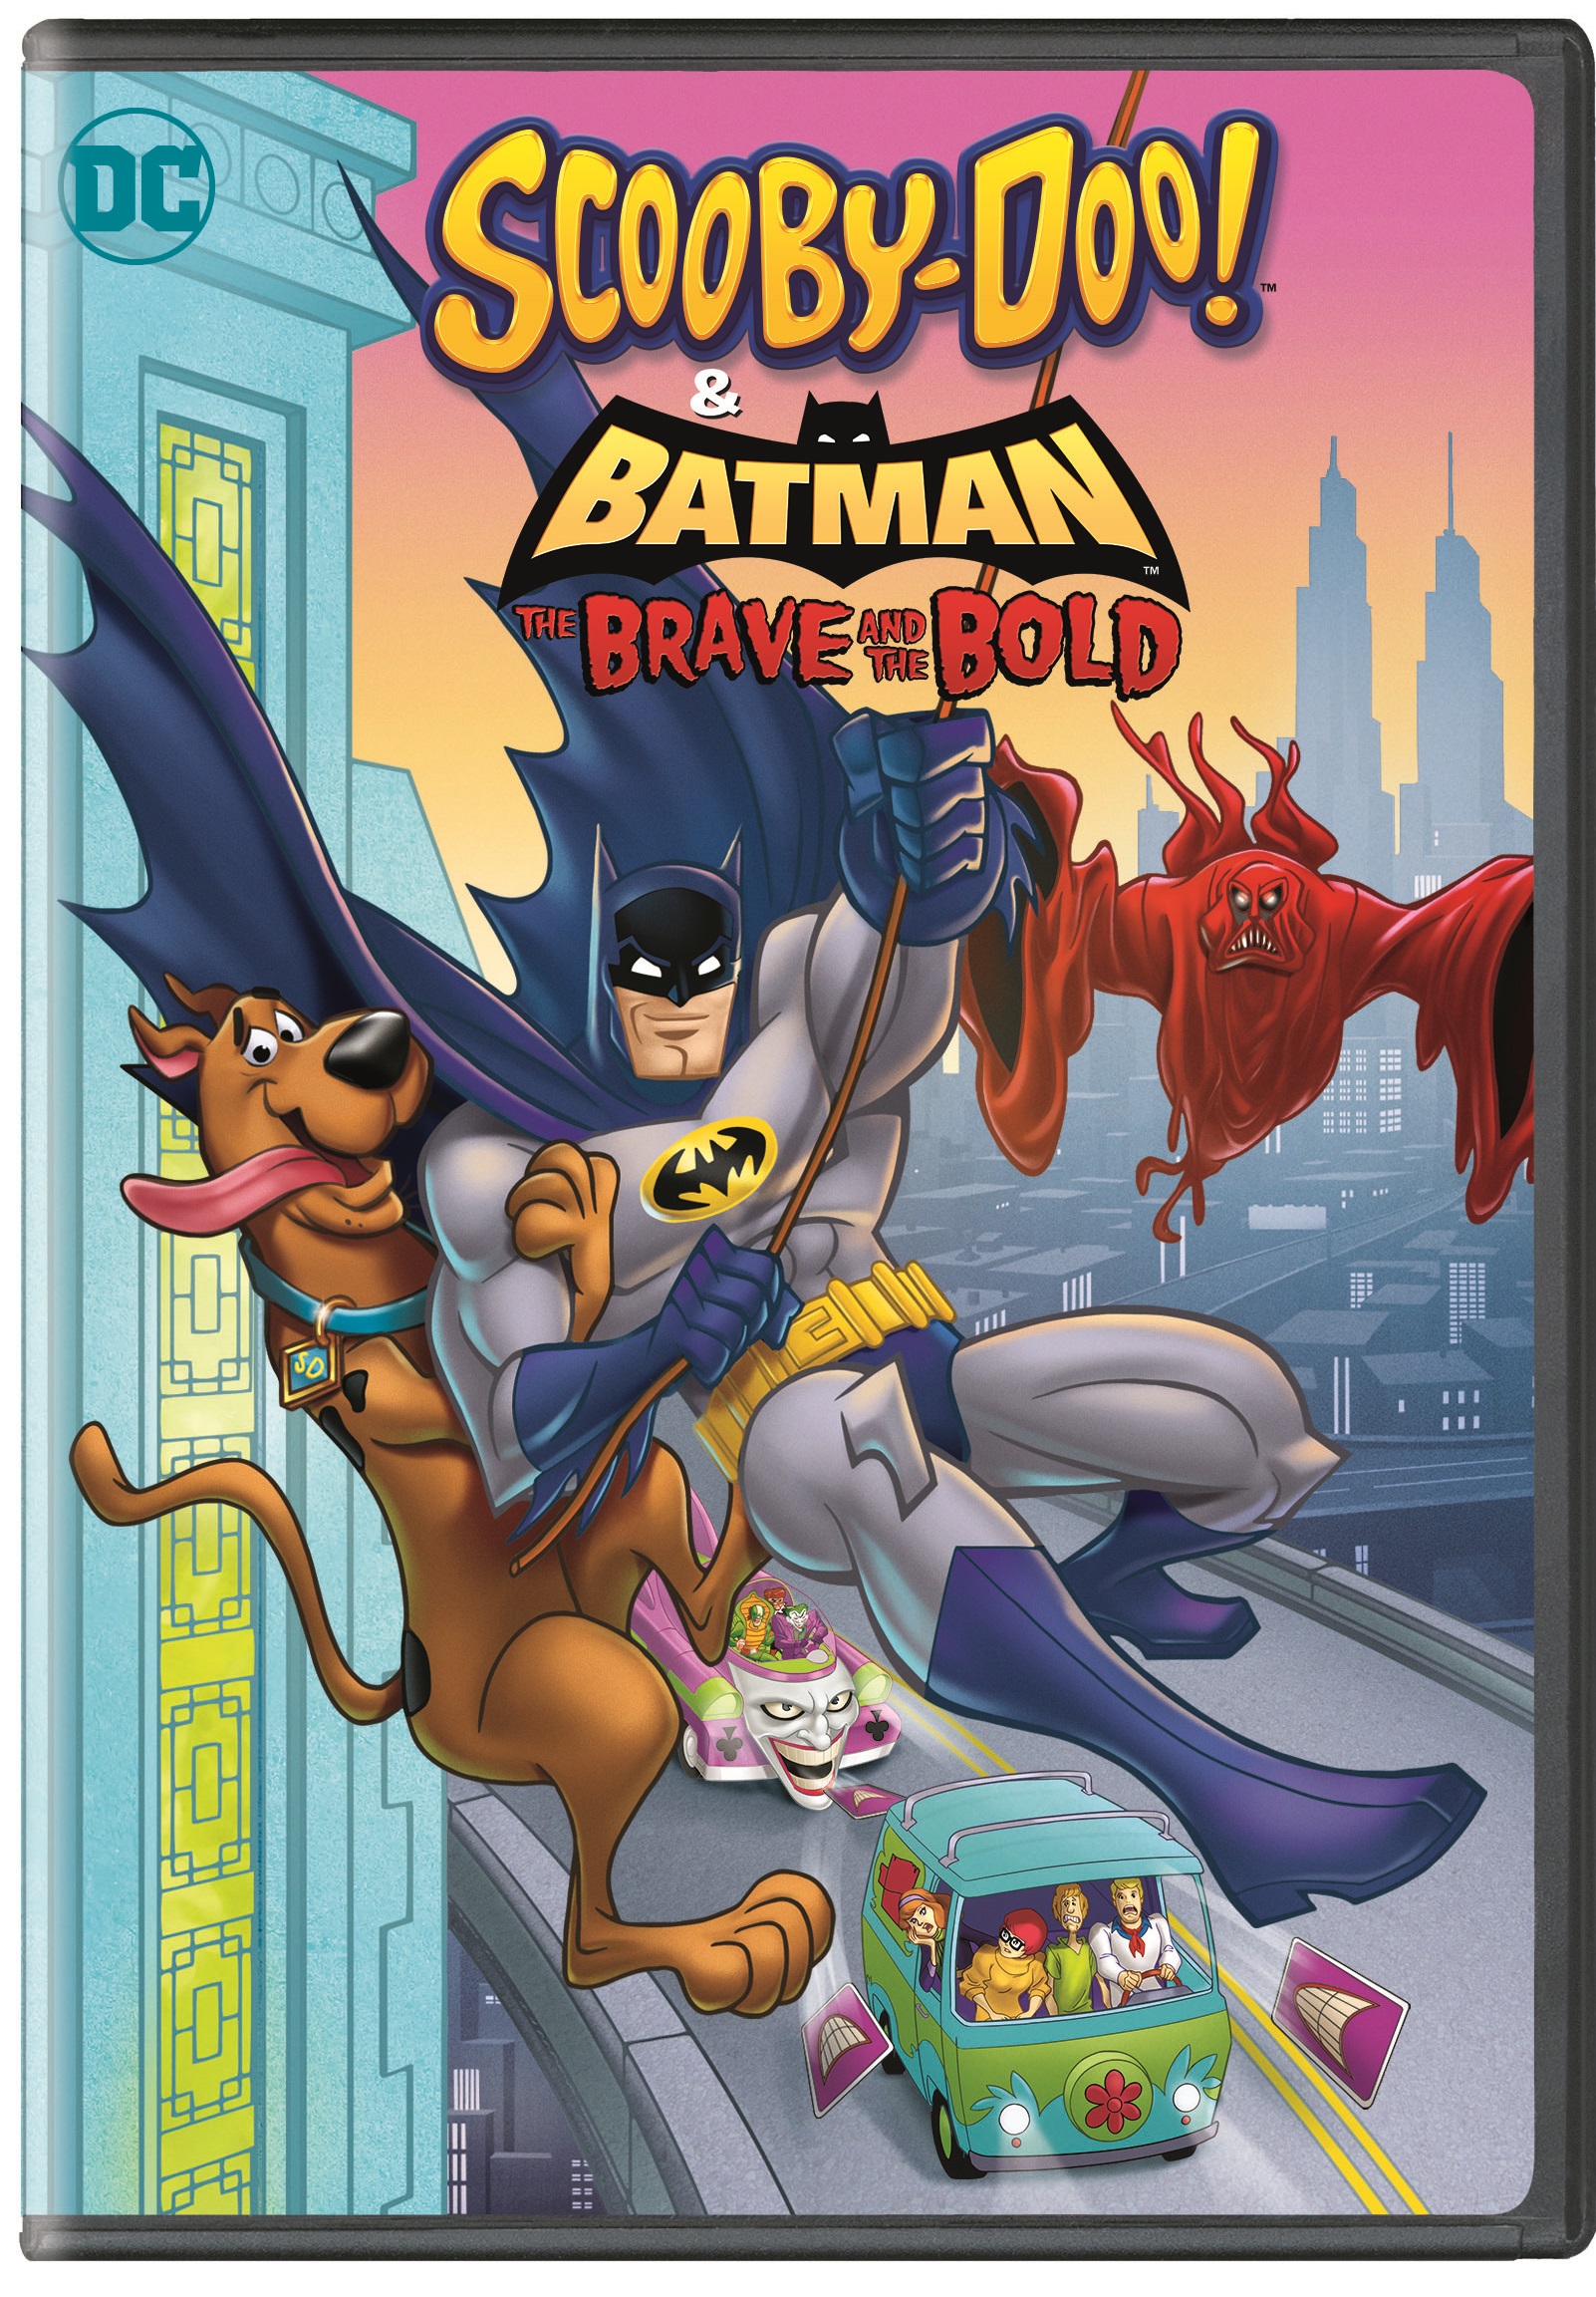 Scooby-Doo! & Batman: The Brave and the Bold DVD Digital Release Warner Bros